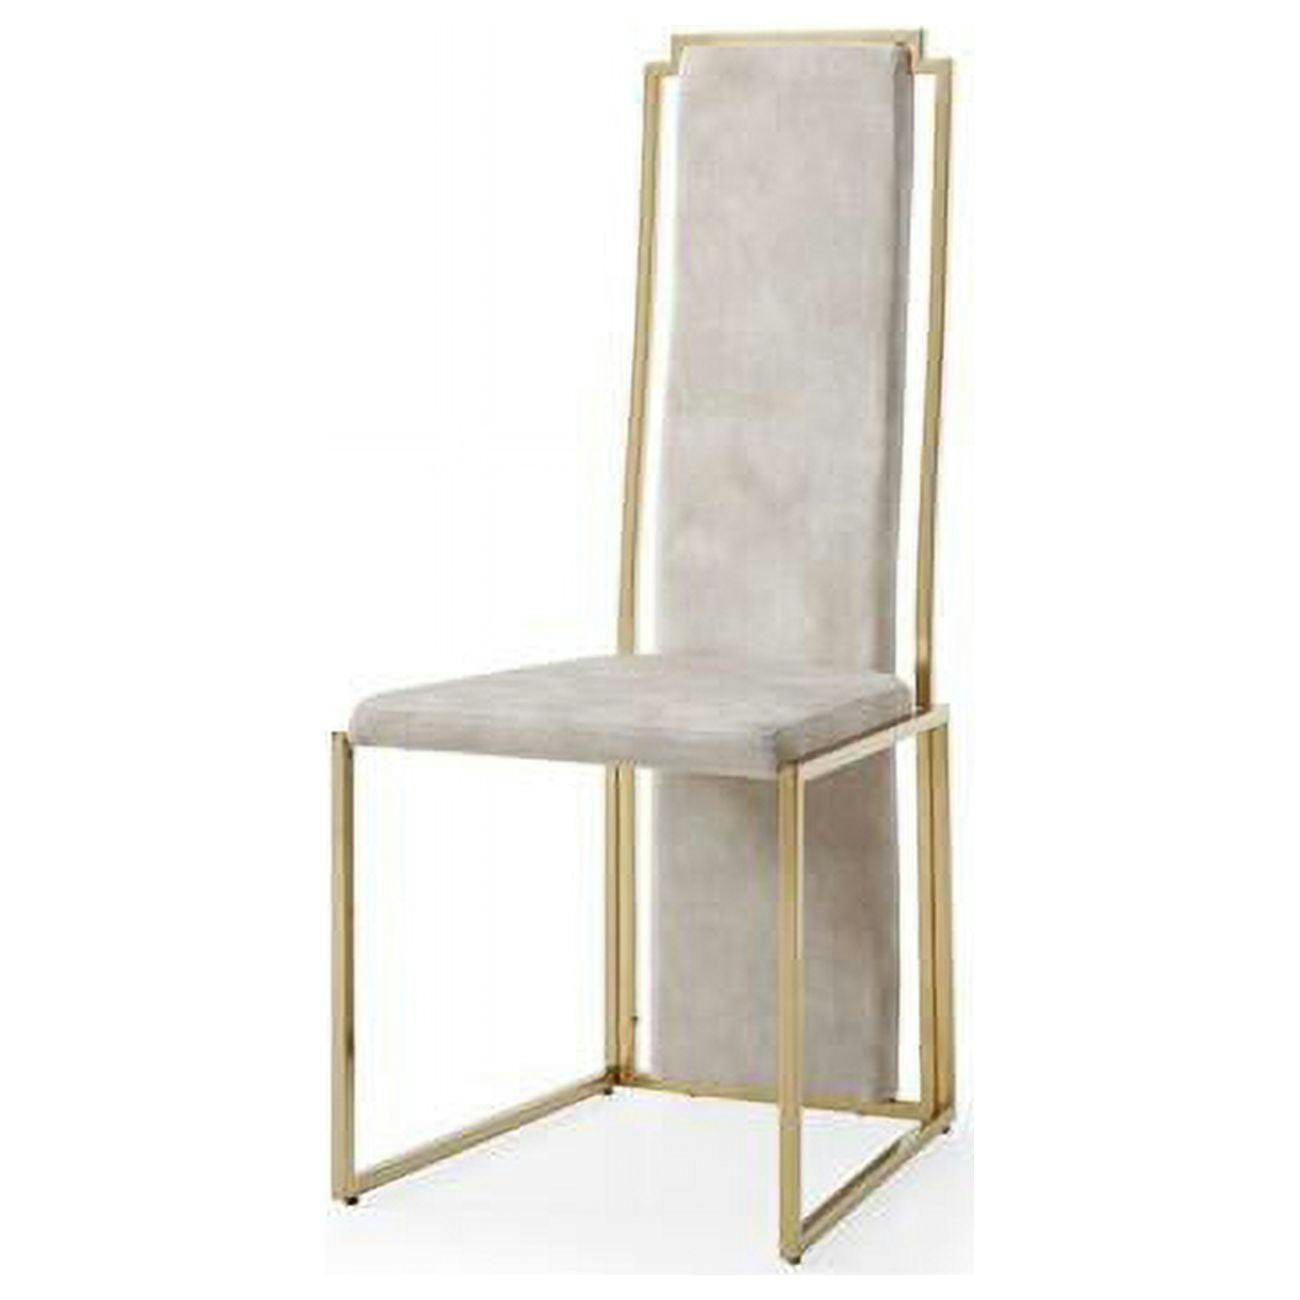 Beige Suede Upholstered Side Chair with Gold Metal Frame